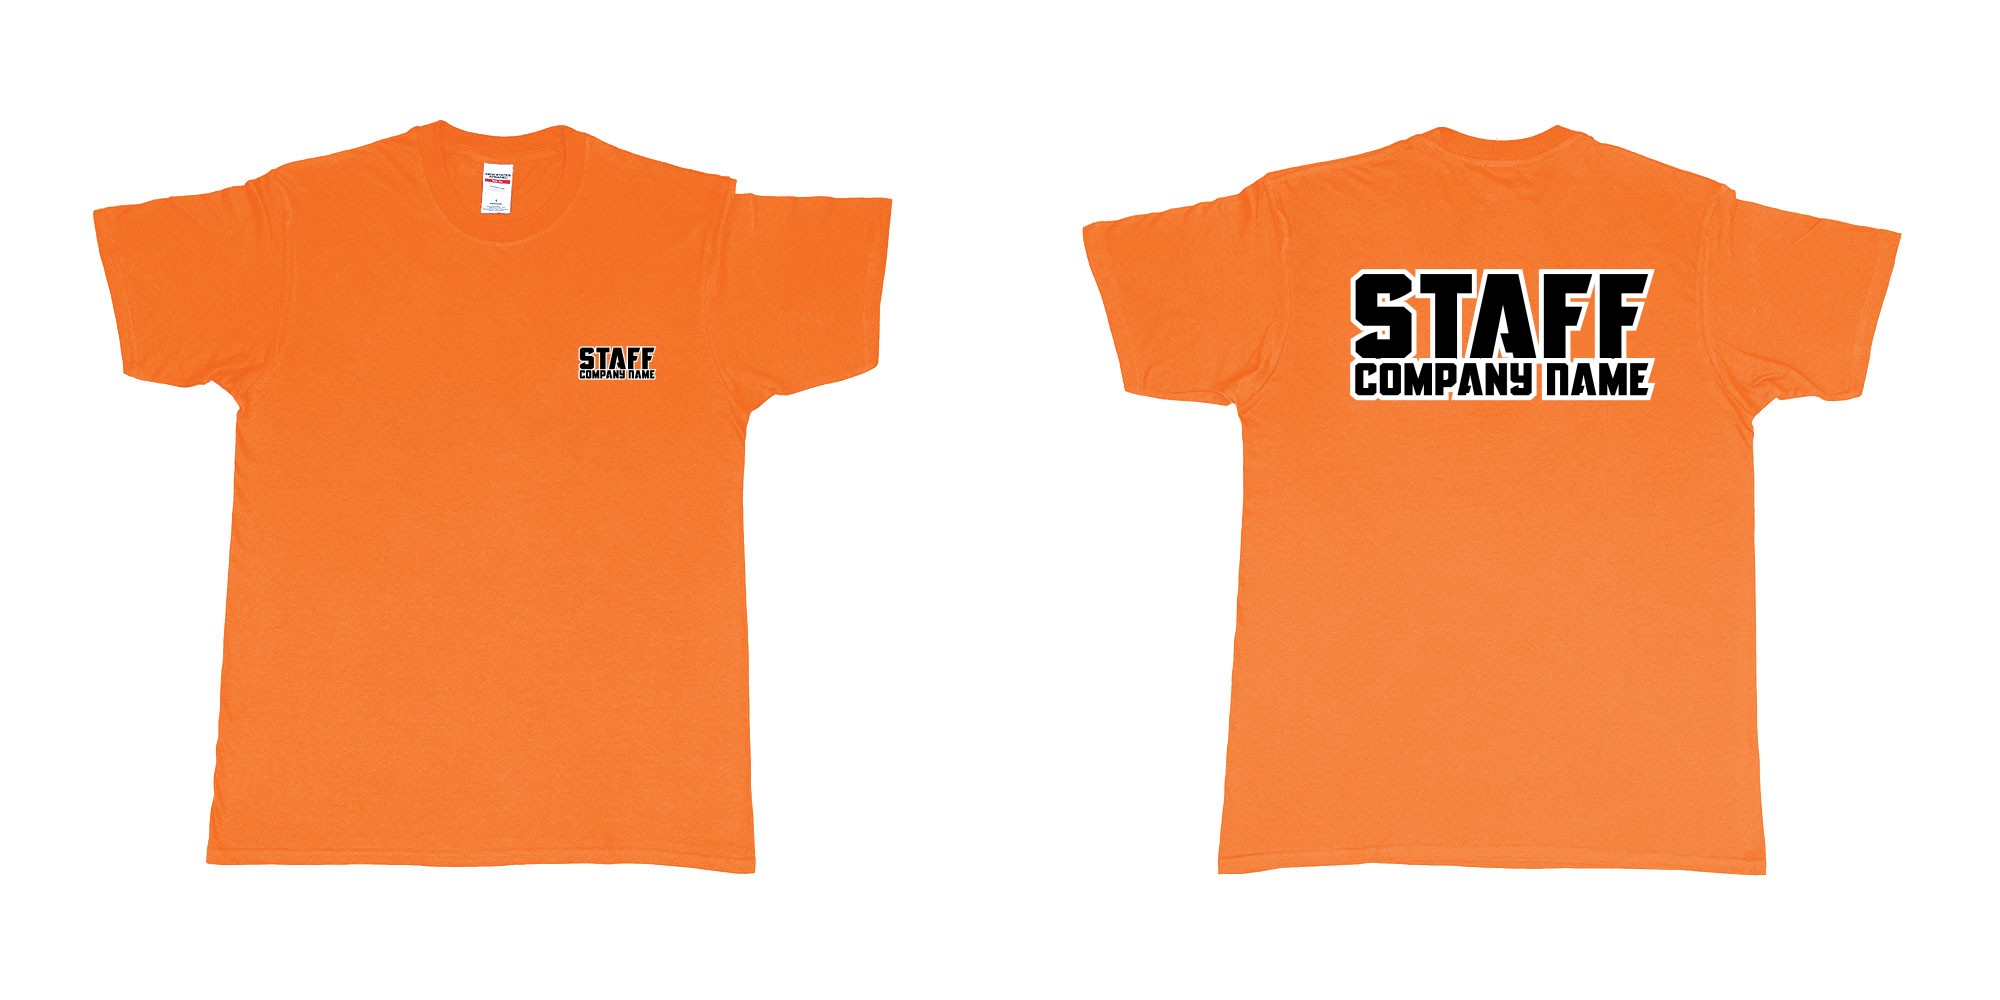 Custom tshirt design staff tshirt own company name in fabric color orange choice your own text made in Bali by The Pirate Way